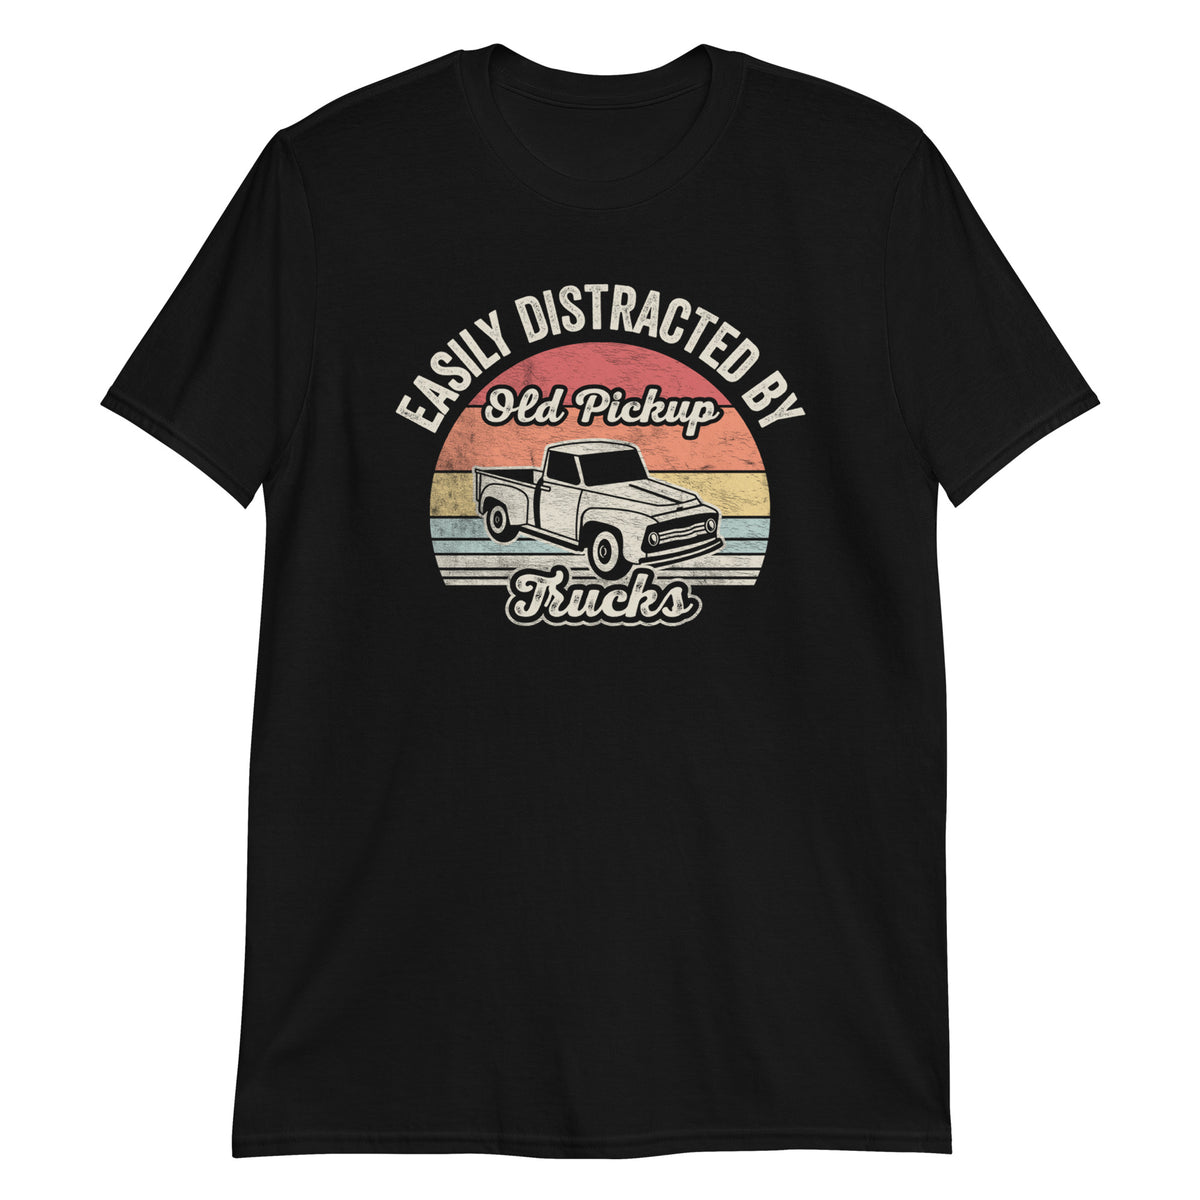 Easily Distracted By Old Pickup Trucks T-Shirt